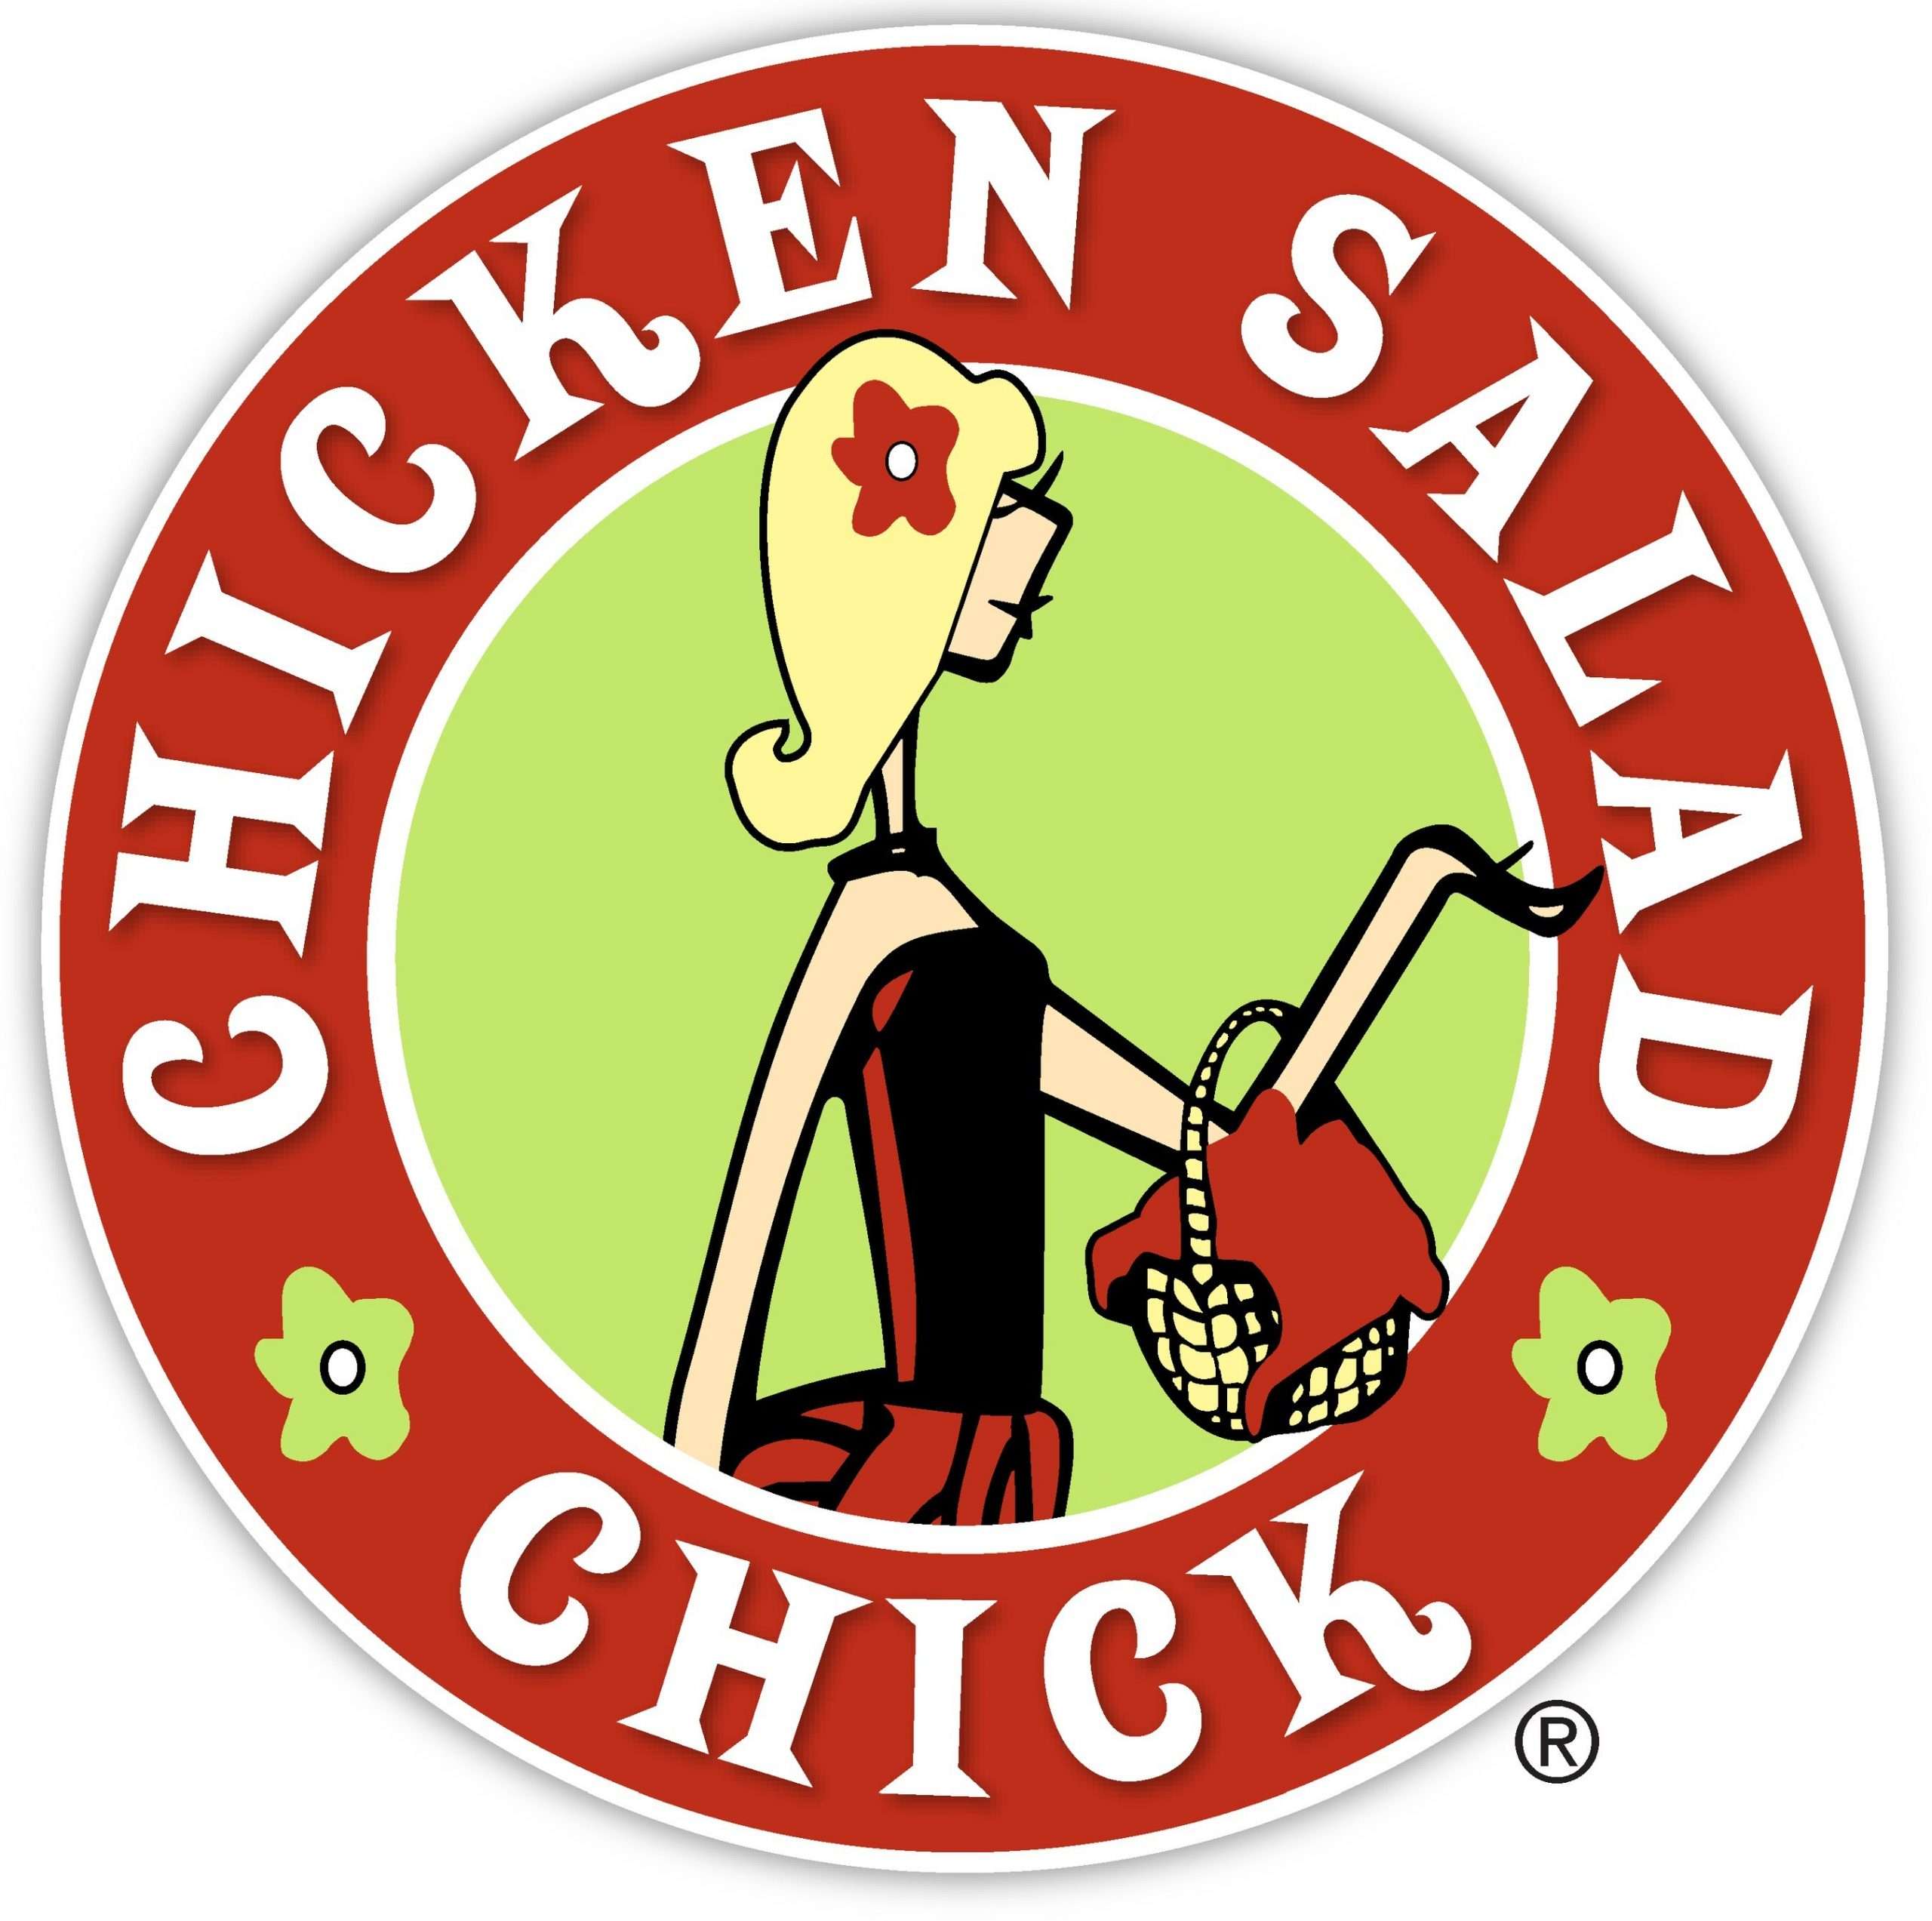 Chicken Salad Chick to Launch First Location in Denham Springs